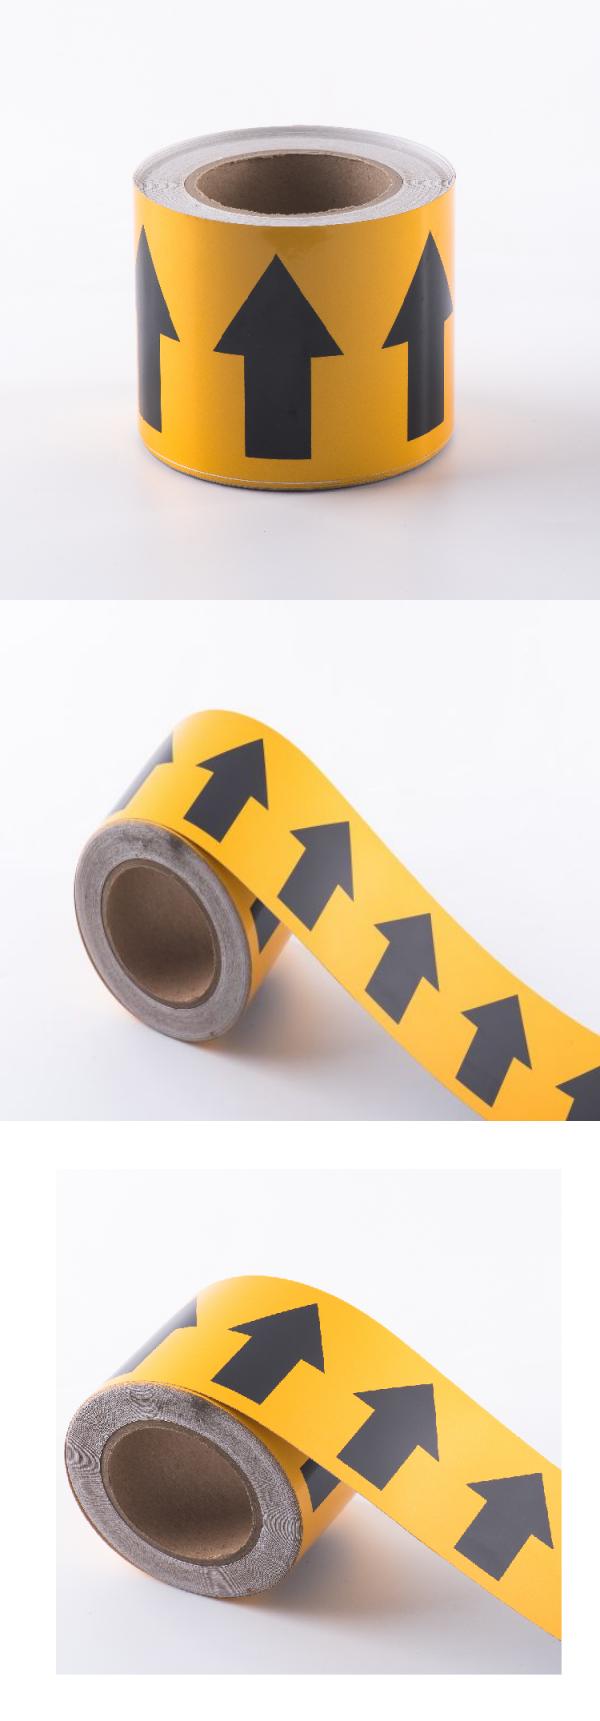 TM3100 PET Commercial Grade Reflective Sheeting Roll YELLOW